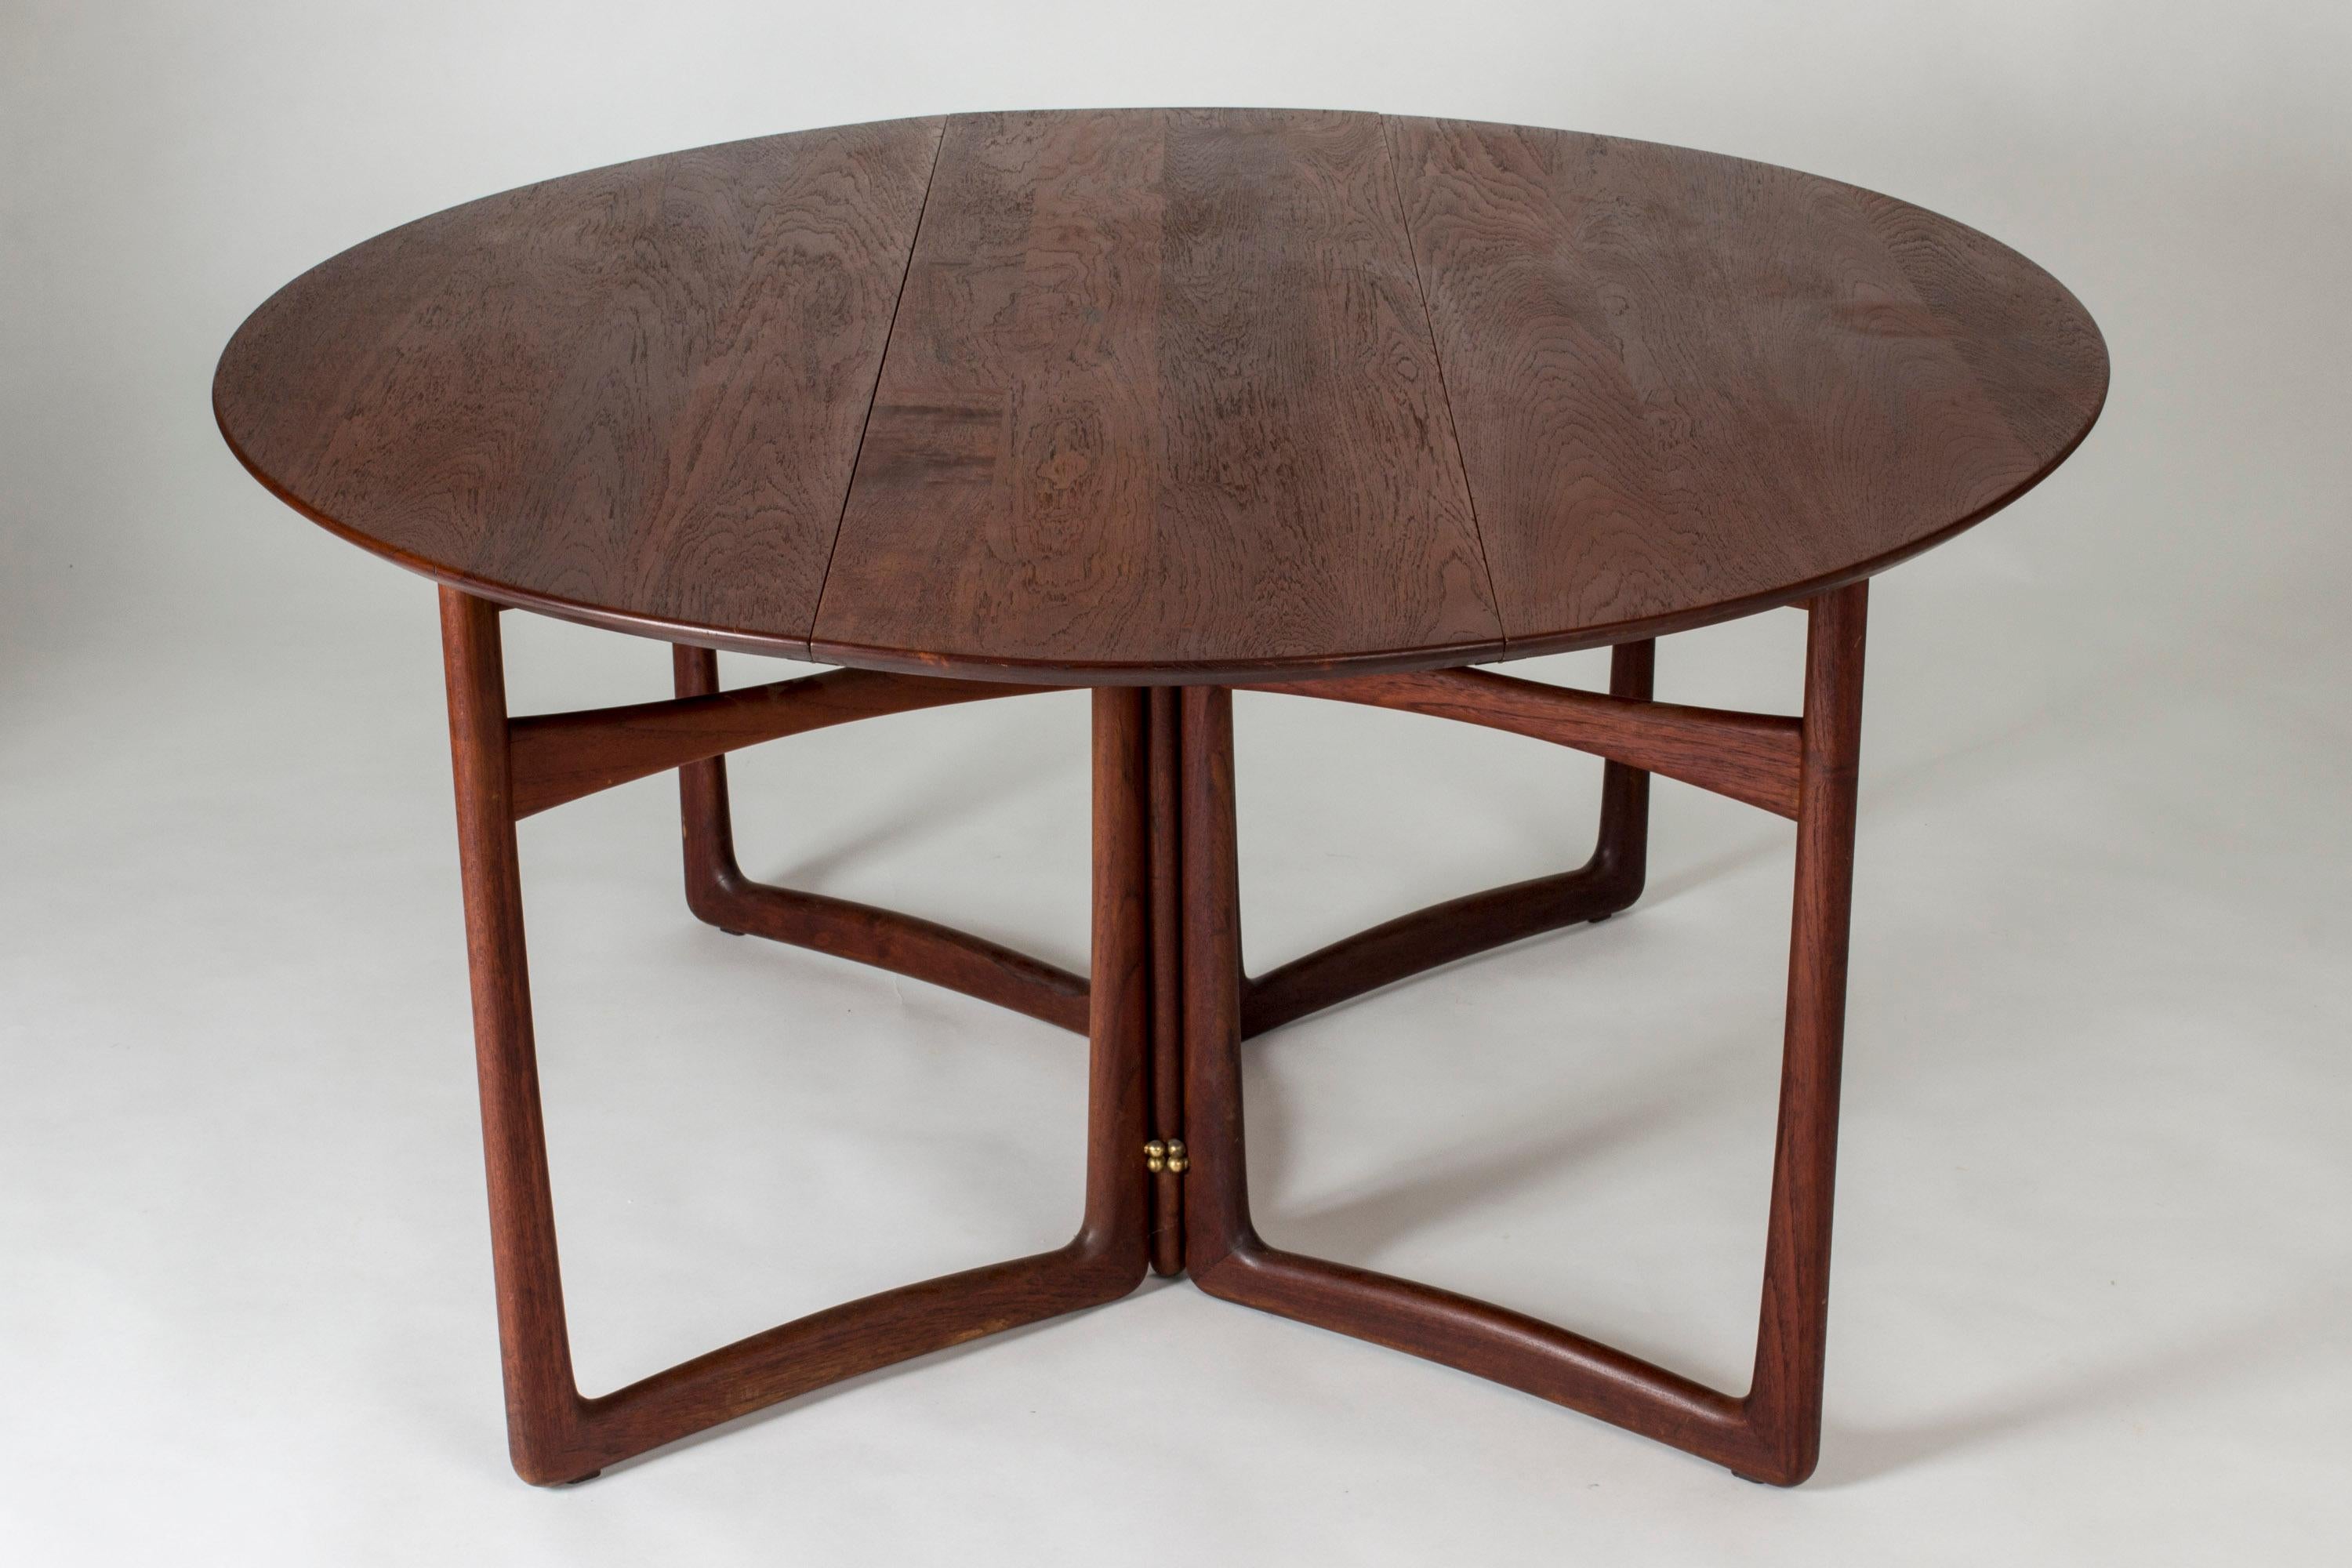 Stunning, sculptural teak drop-leaf dining table by Peter Hvidt and Orla Møllgaard. Beautiful oval shape and legs in the shape of five joined, sculpted rectangles. Beautiful teak woodgrain.